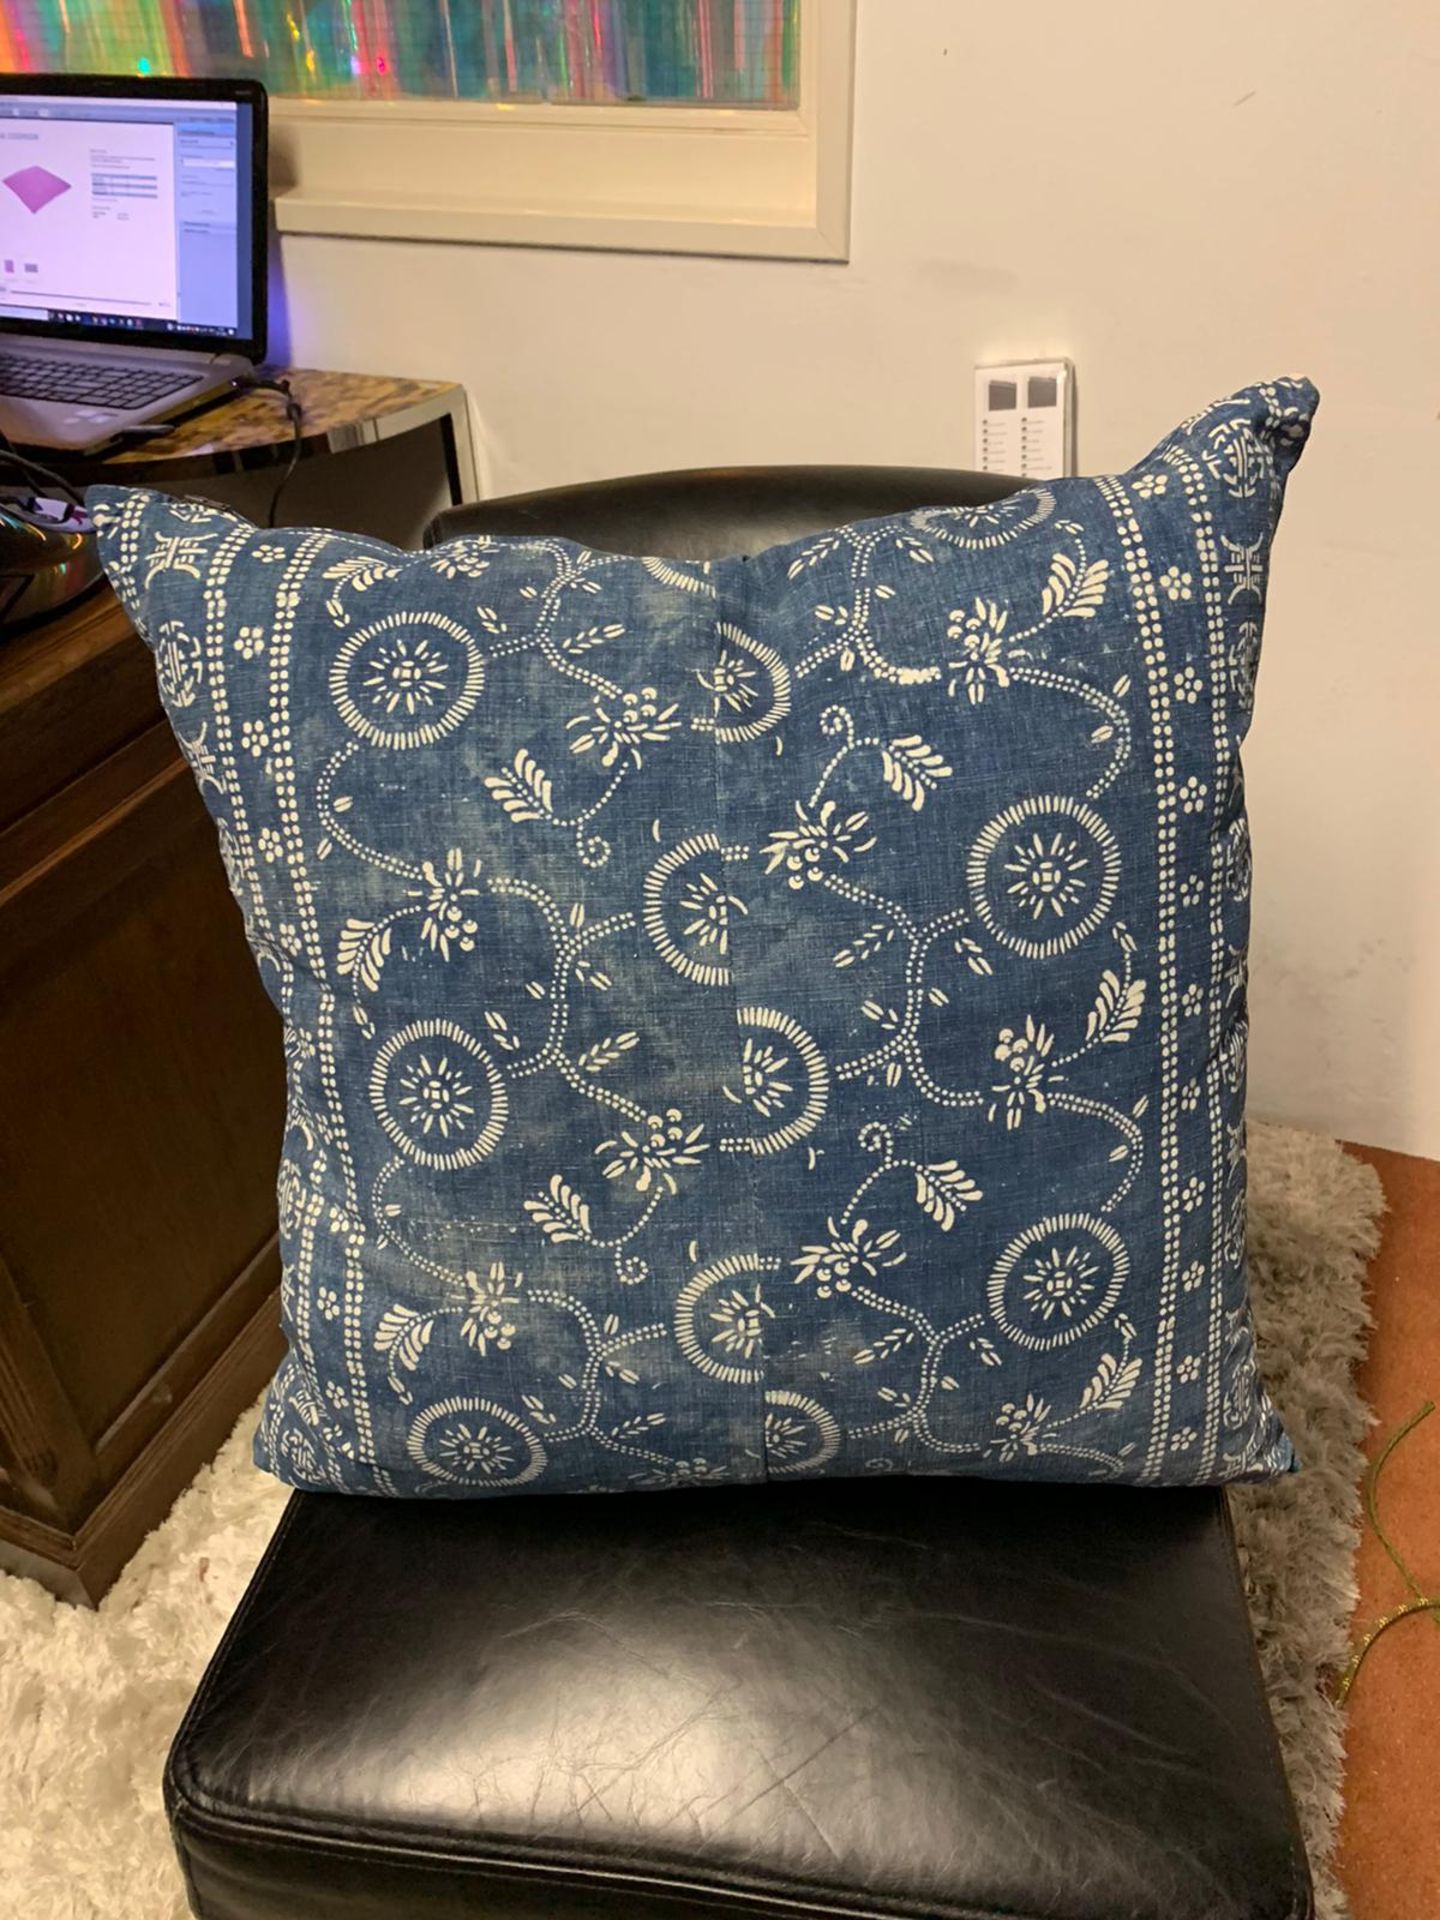 Guatemalan Denim Blue Cushion The Guatemalan Denim Cushions Are Available In A Number Of Finishes,